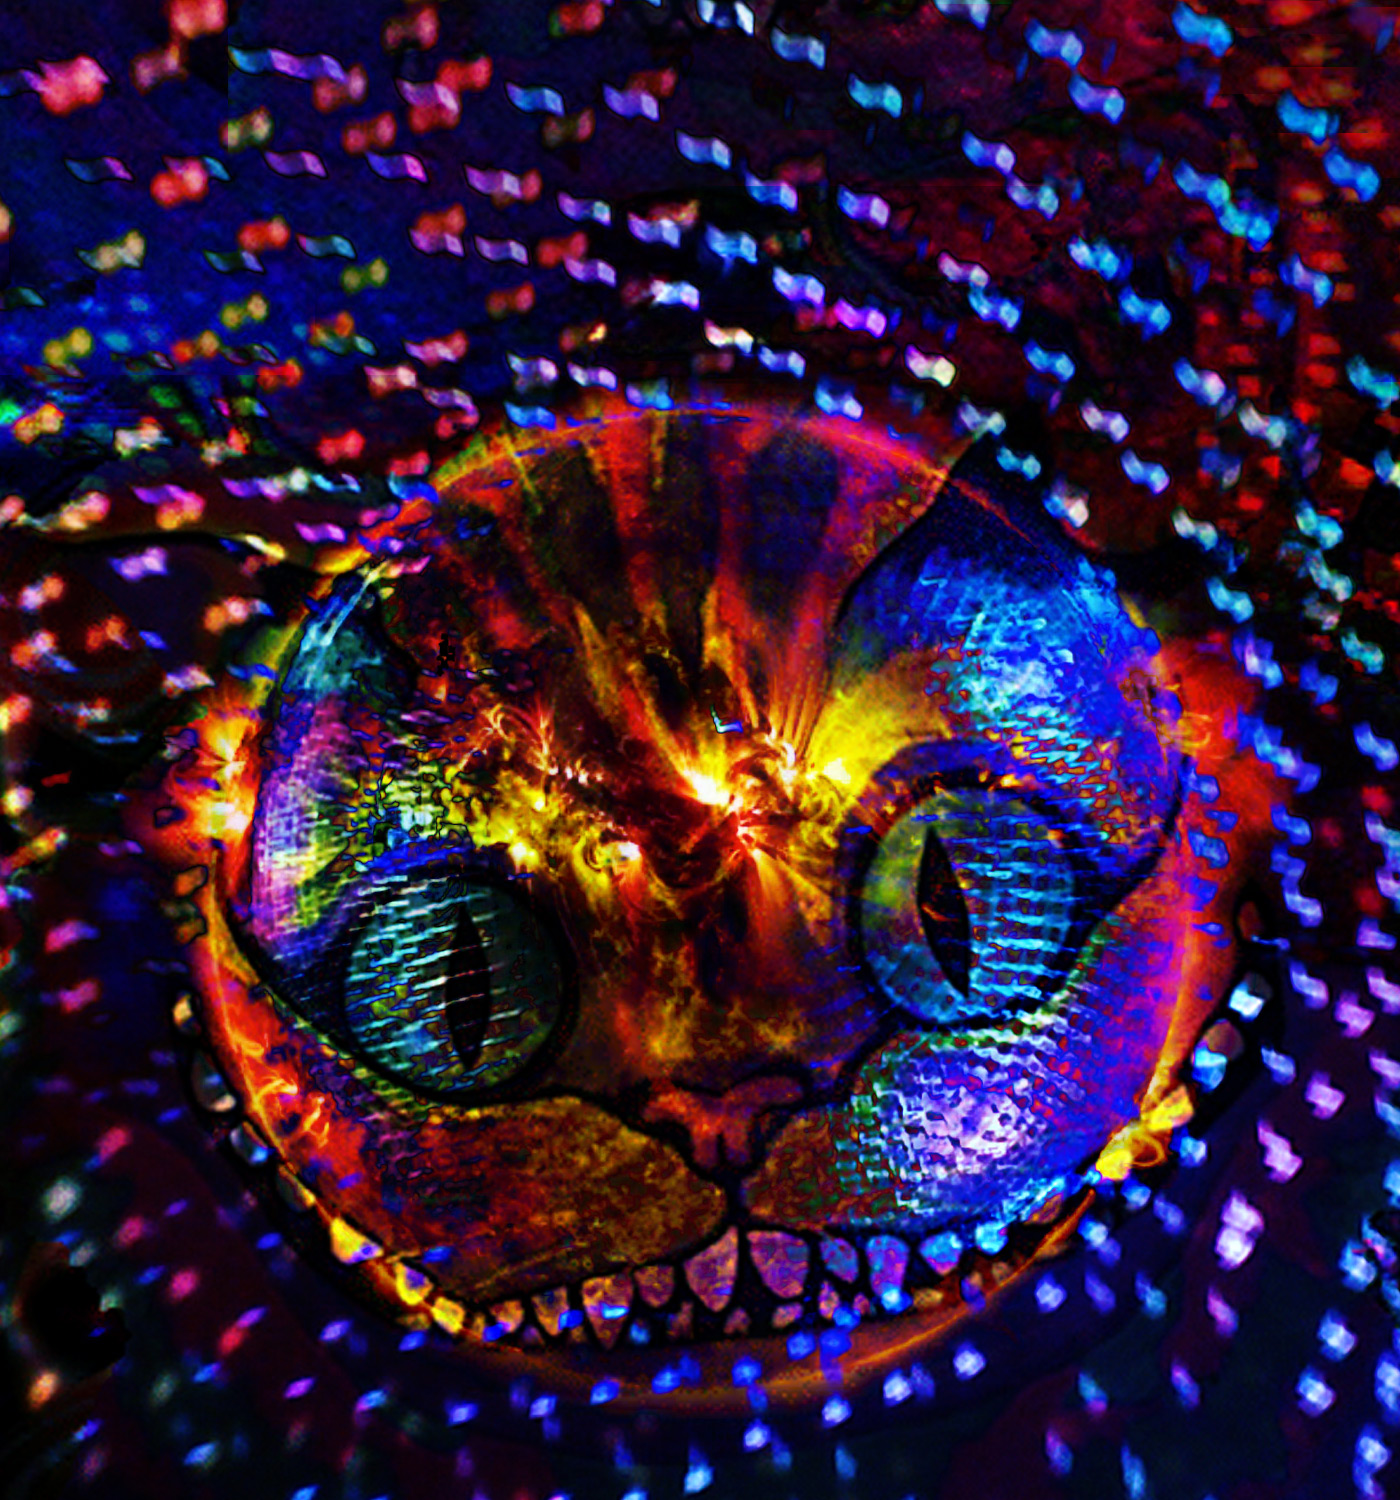 disco psycheness mainimage - Radio Clash Podcast Psychodelidisco (Disco Psycheness) - 3 hour psychedelic space disco mix Radio Clash Music Mashup Podcast brings you the best in eclectic tunes, mashups and remixes from around the world. Since 2004, we've been bringing you the freshest and most innovative music from a diverse range of genres and cultures. Join us on our musical journey as we explore the sounds of yesterday, today, and tomorrow. Discover new music and be inspired by the mashup of musical styles that only Radio Clash can provide. Subscribe now to elevate your musical experience!